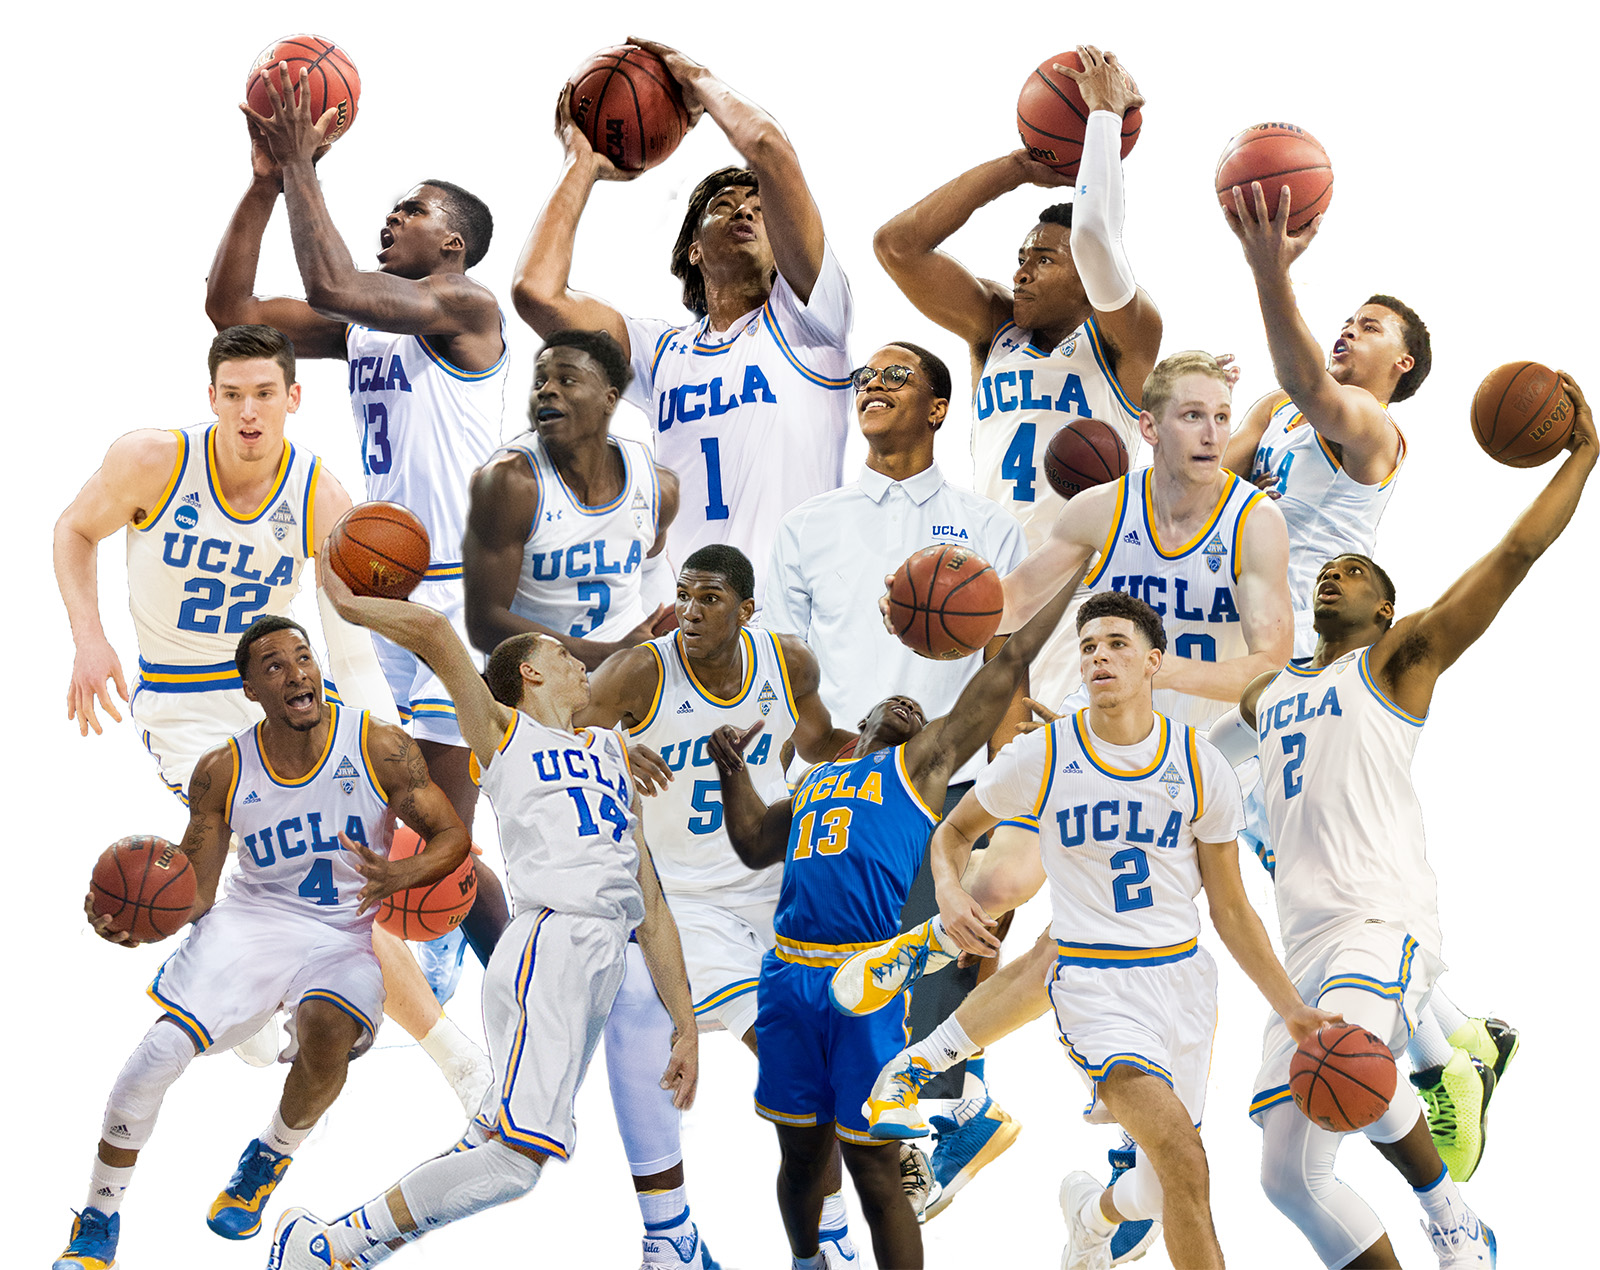 Potential NBA draft picks abound in UCLA men’s basketball’s 2018 roster